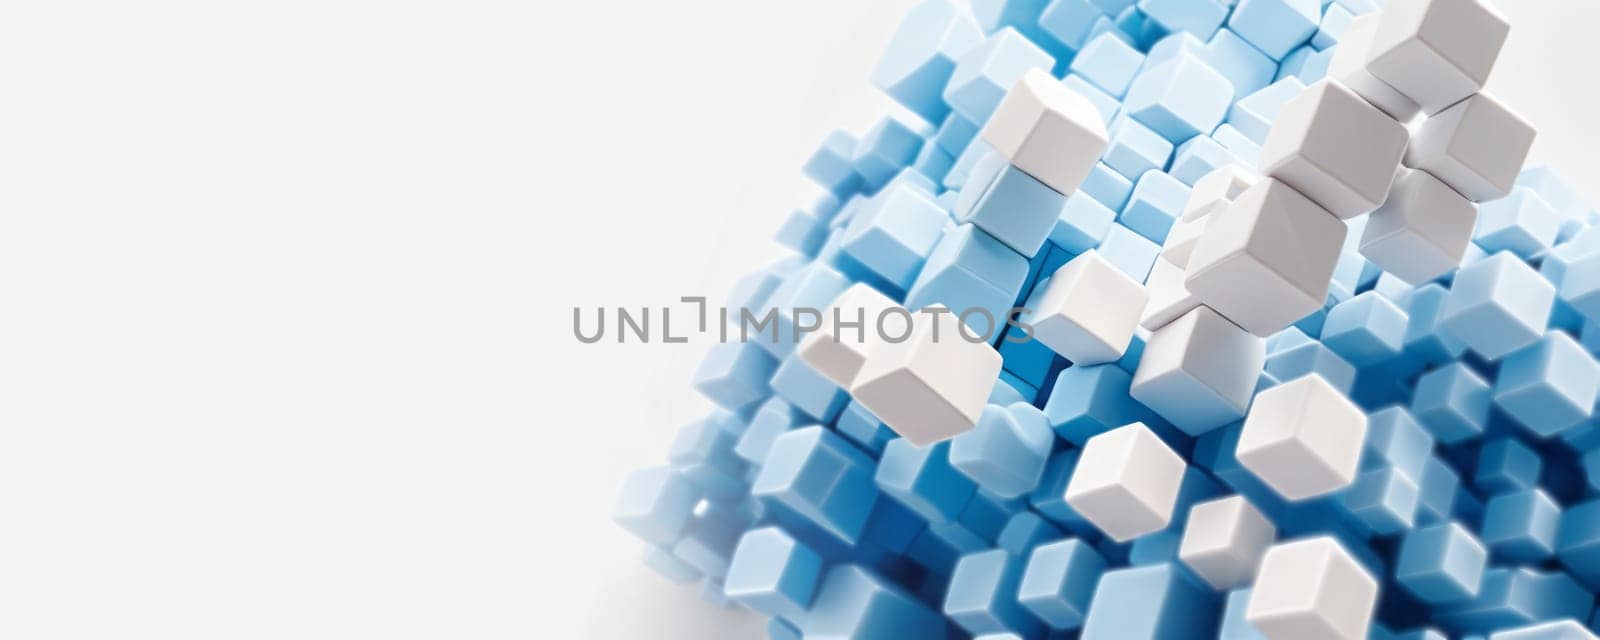 The image presents a cluster of small, 3D cubes forming a structure. The majority of the cubes are blue, contrasting with the white background and a few interspersed white cubes. The arrangement and shadows give a sense of depth and dimensionality, evoking thoughts of digital technology or abstract art. Generative AI